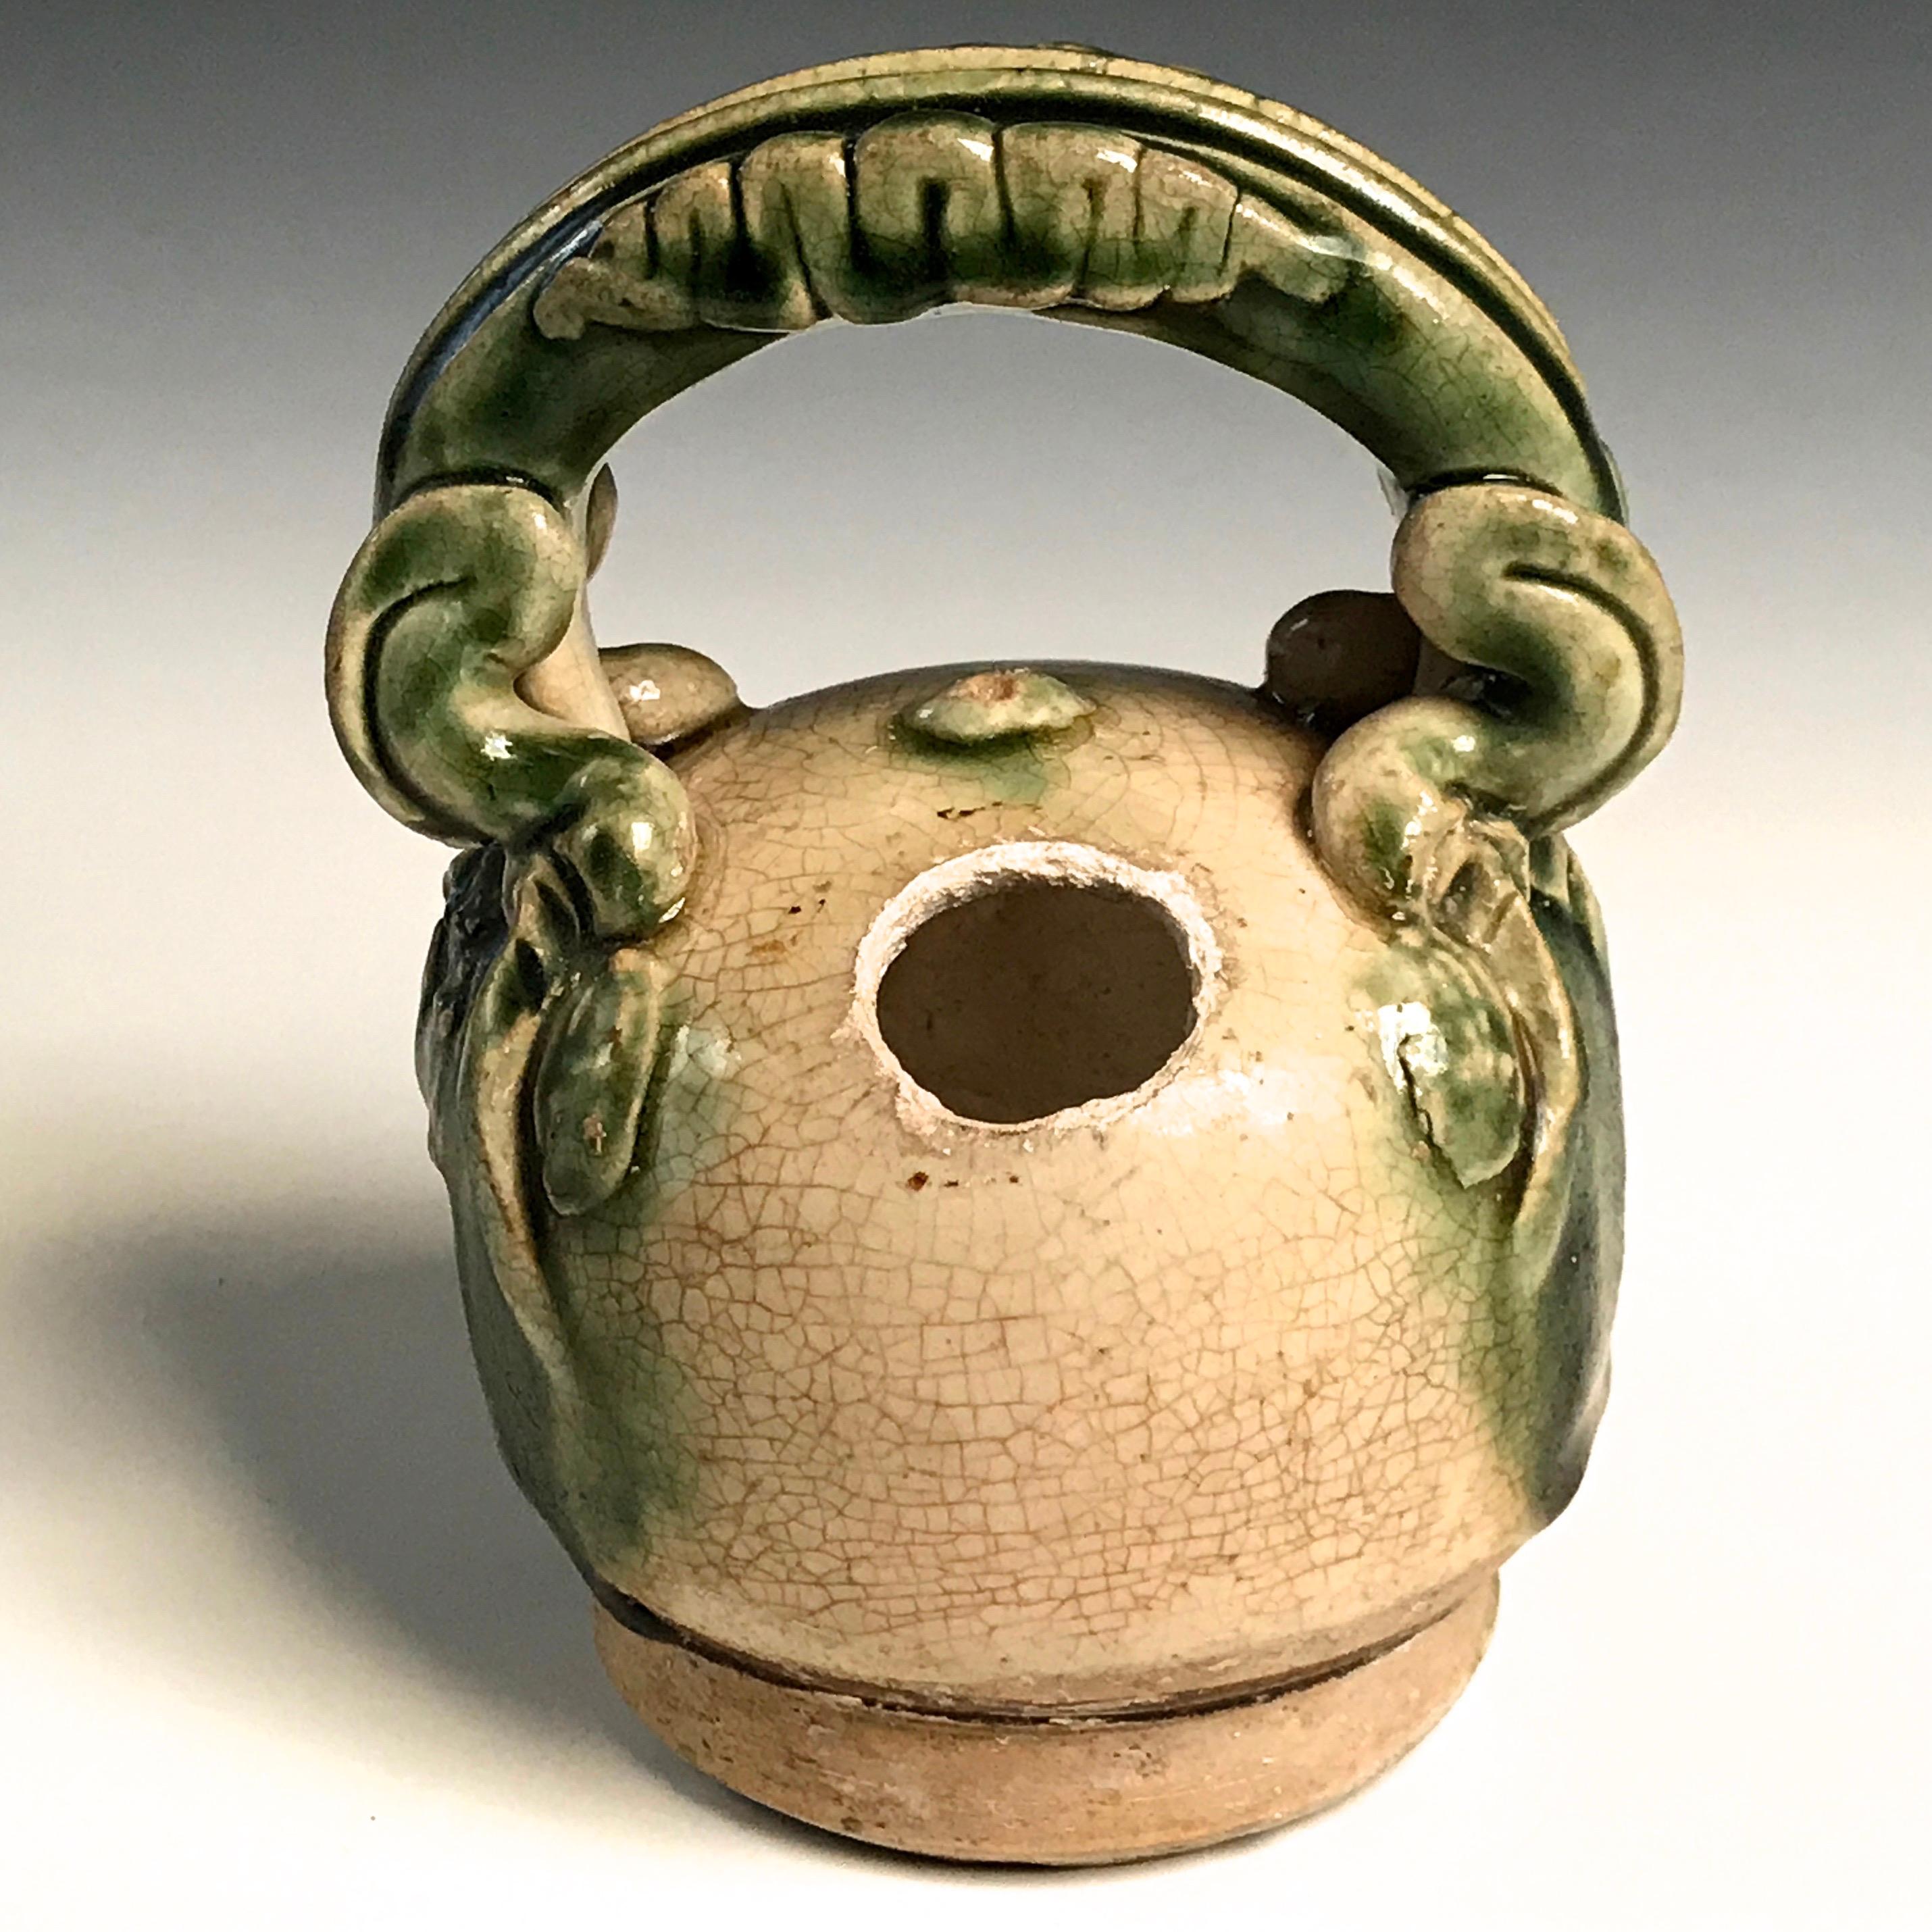 Anamese three-color ware ceramic lime pot for slaked lime a component for the social practice of chewing “Betelnut”, globular form resembling an areca nut with round aperture at the shoulder and decorative overhead handle stylized in such a way that